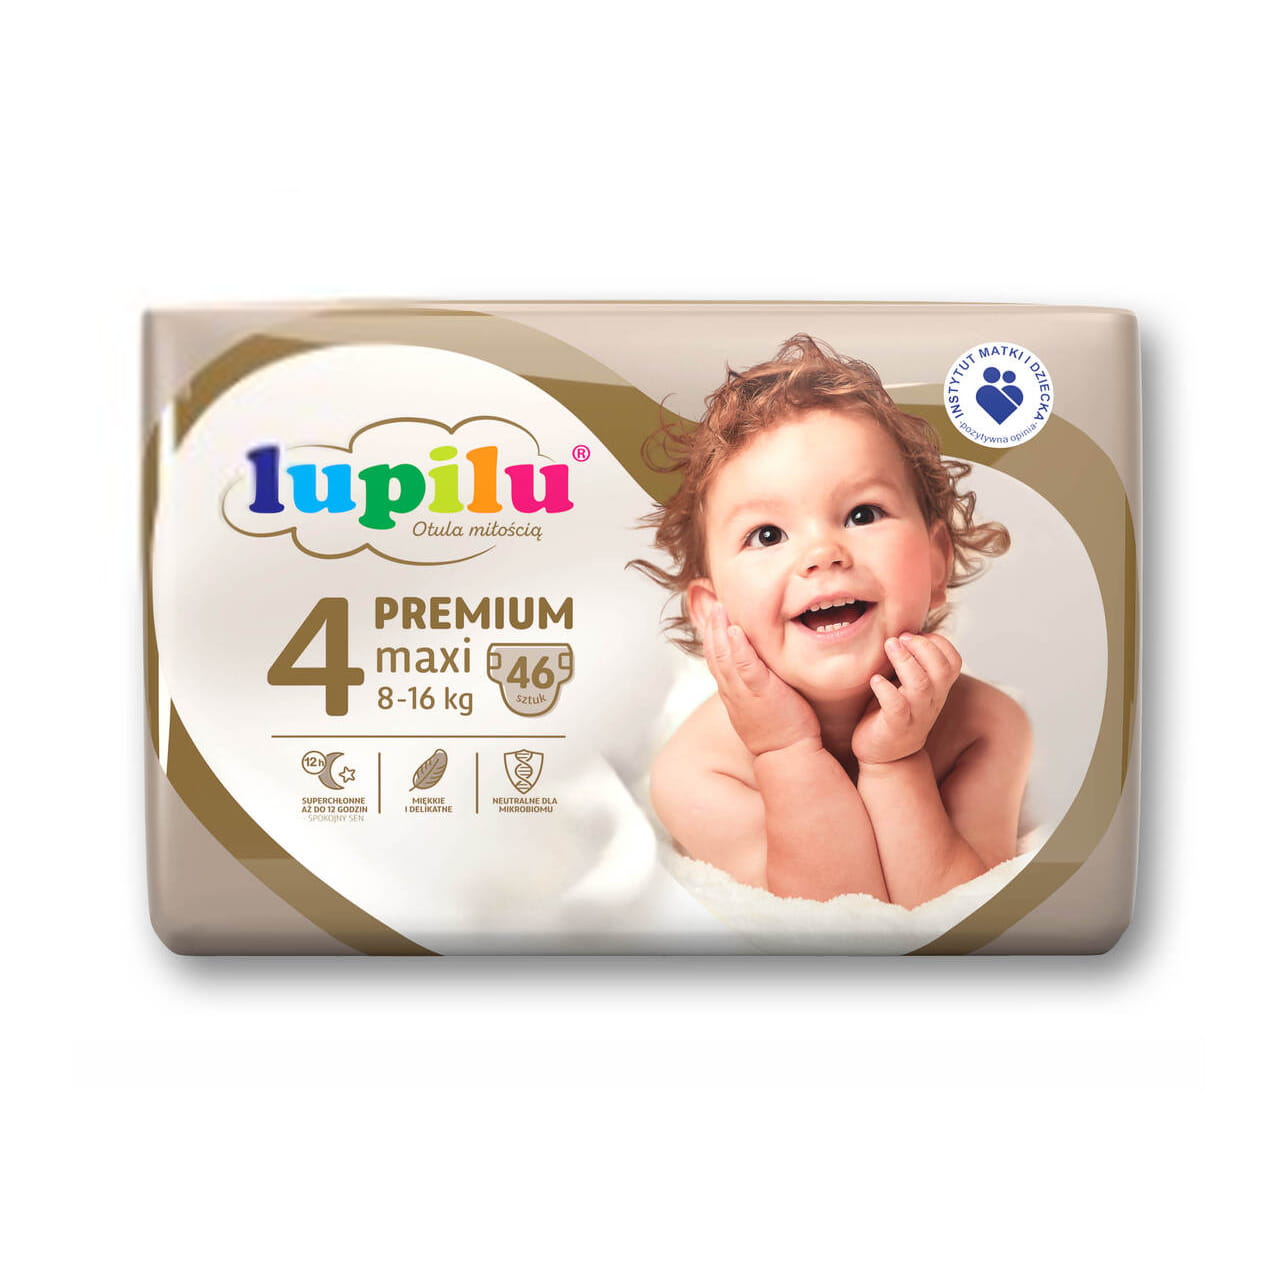 peluchy pampers ceneo